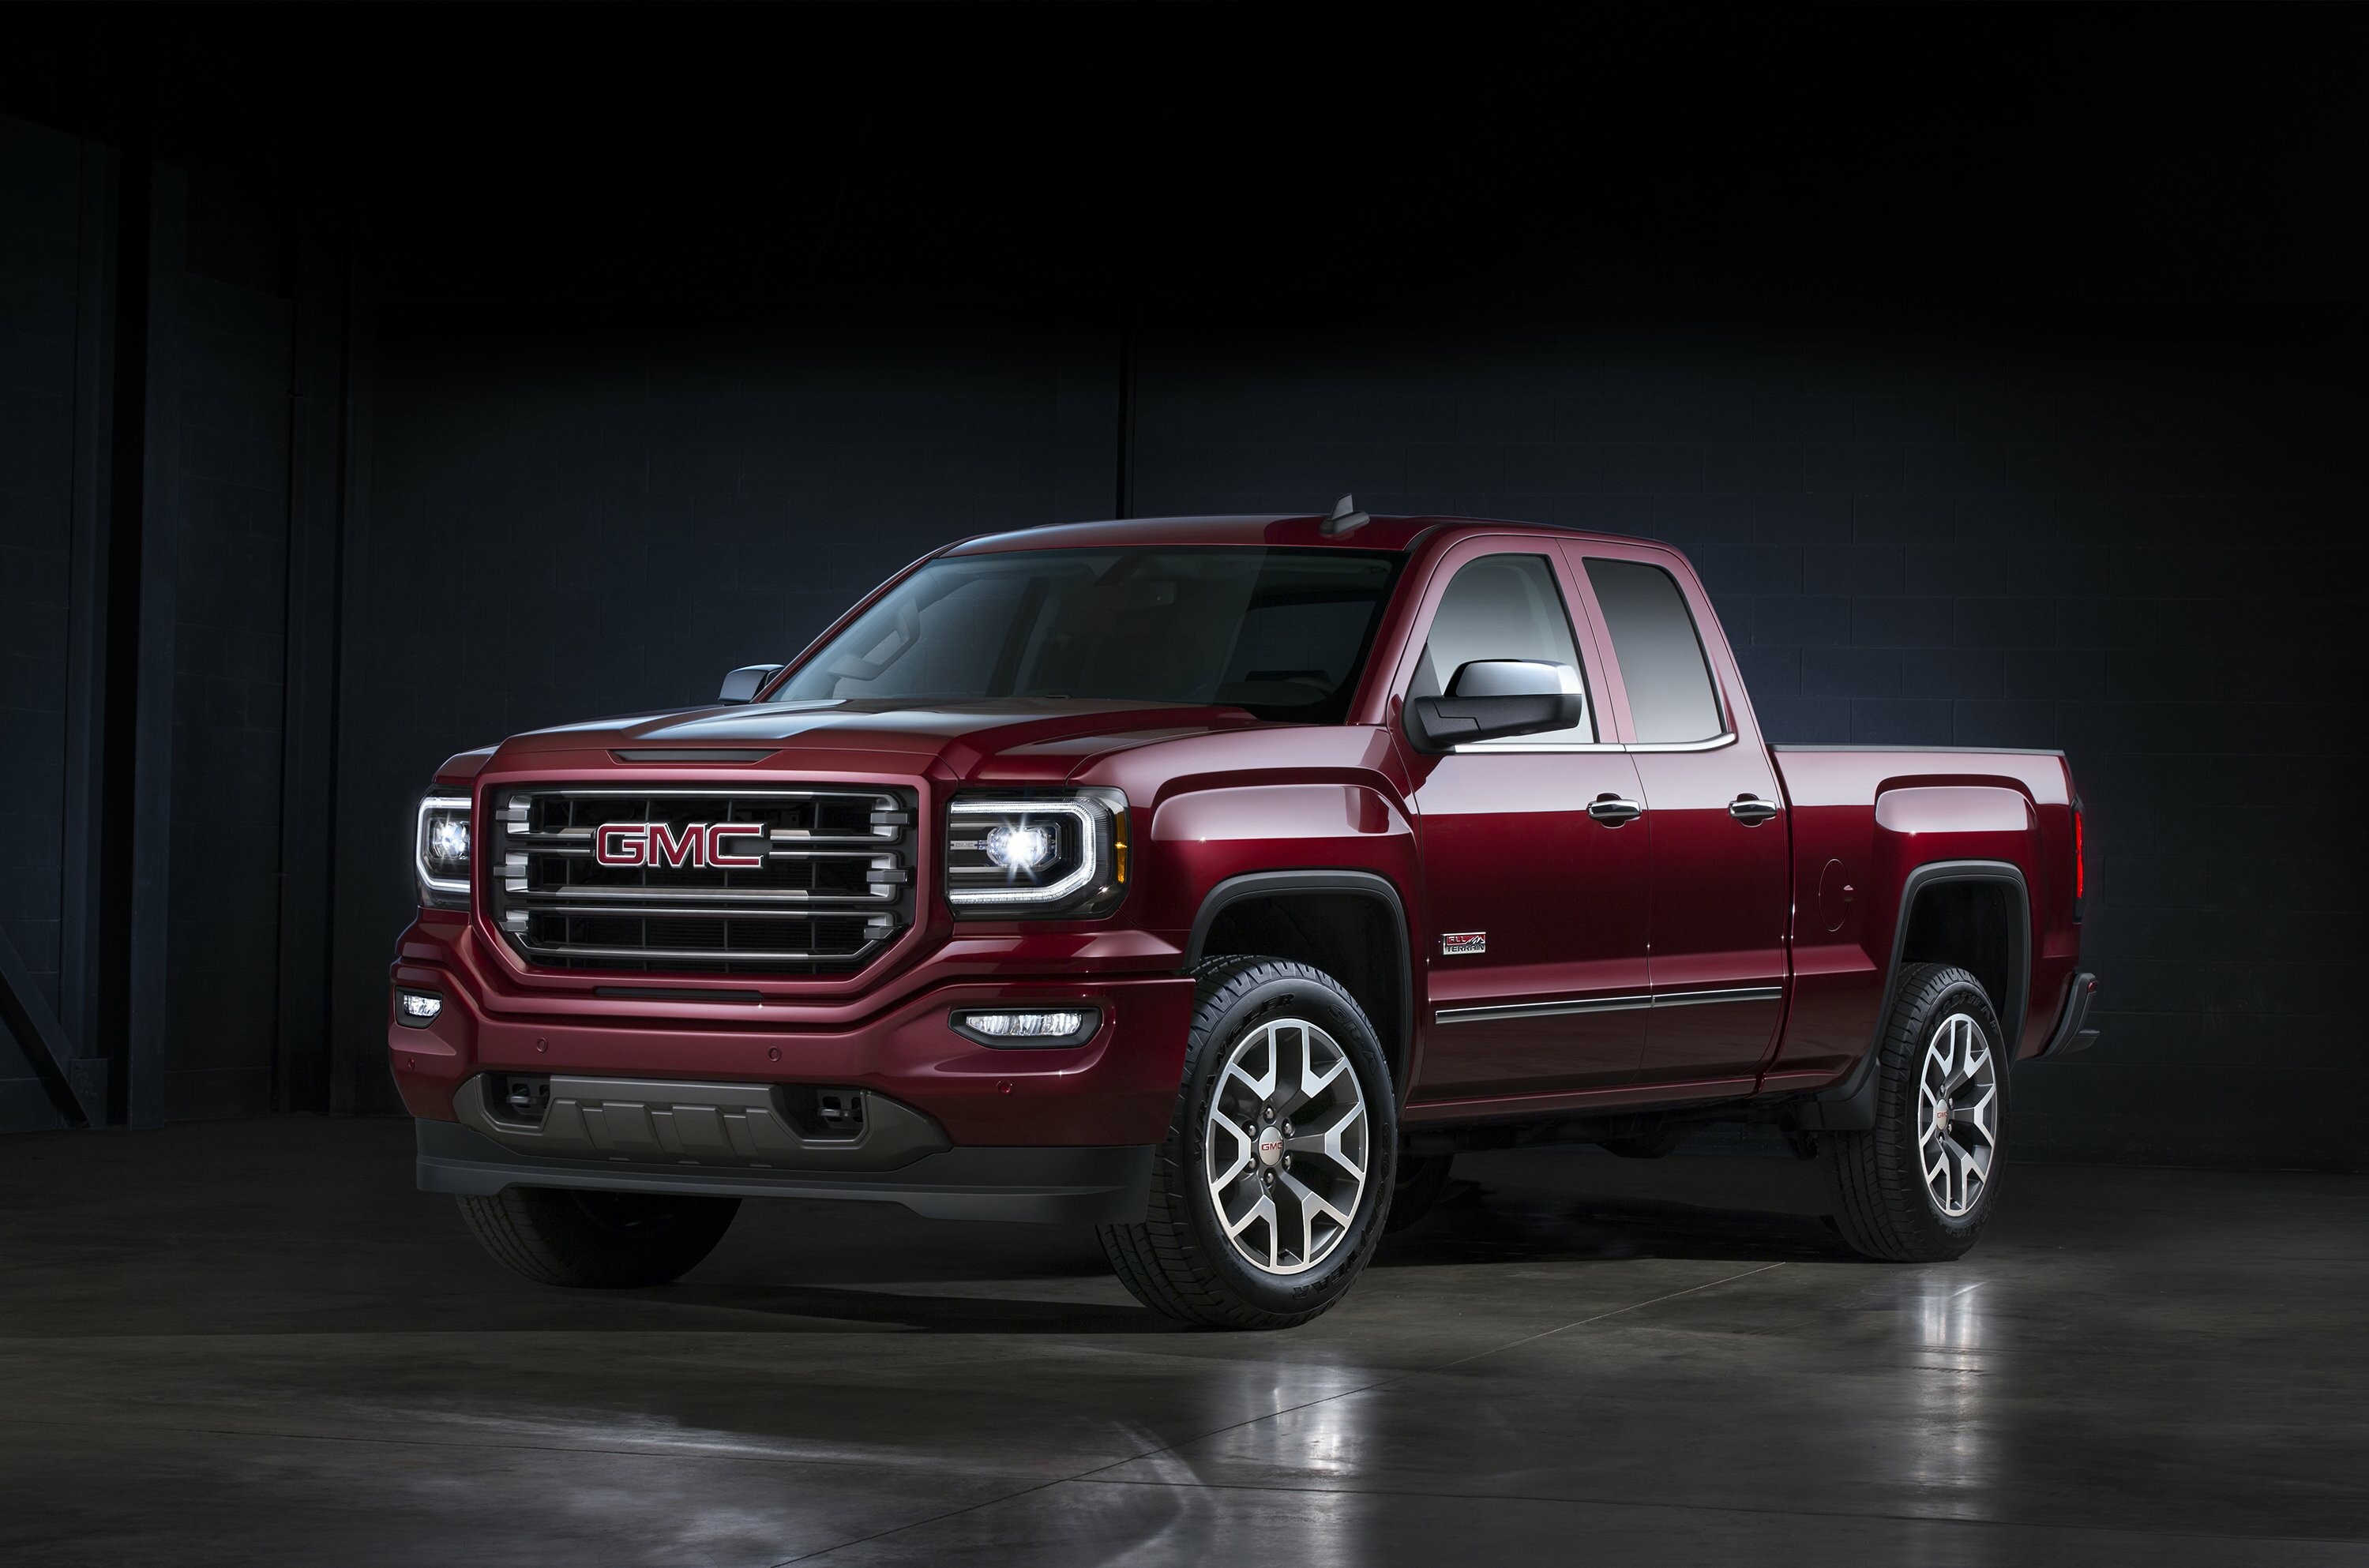 GMC Sierra: All Terrain 1500 Double Cab, Body styles, 4WD, A specific off-road chassis. 3000x1990 HD Wallpaper.